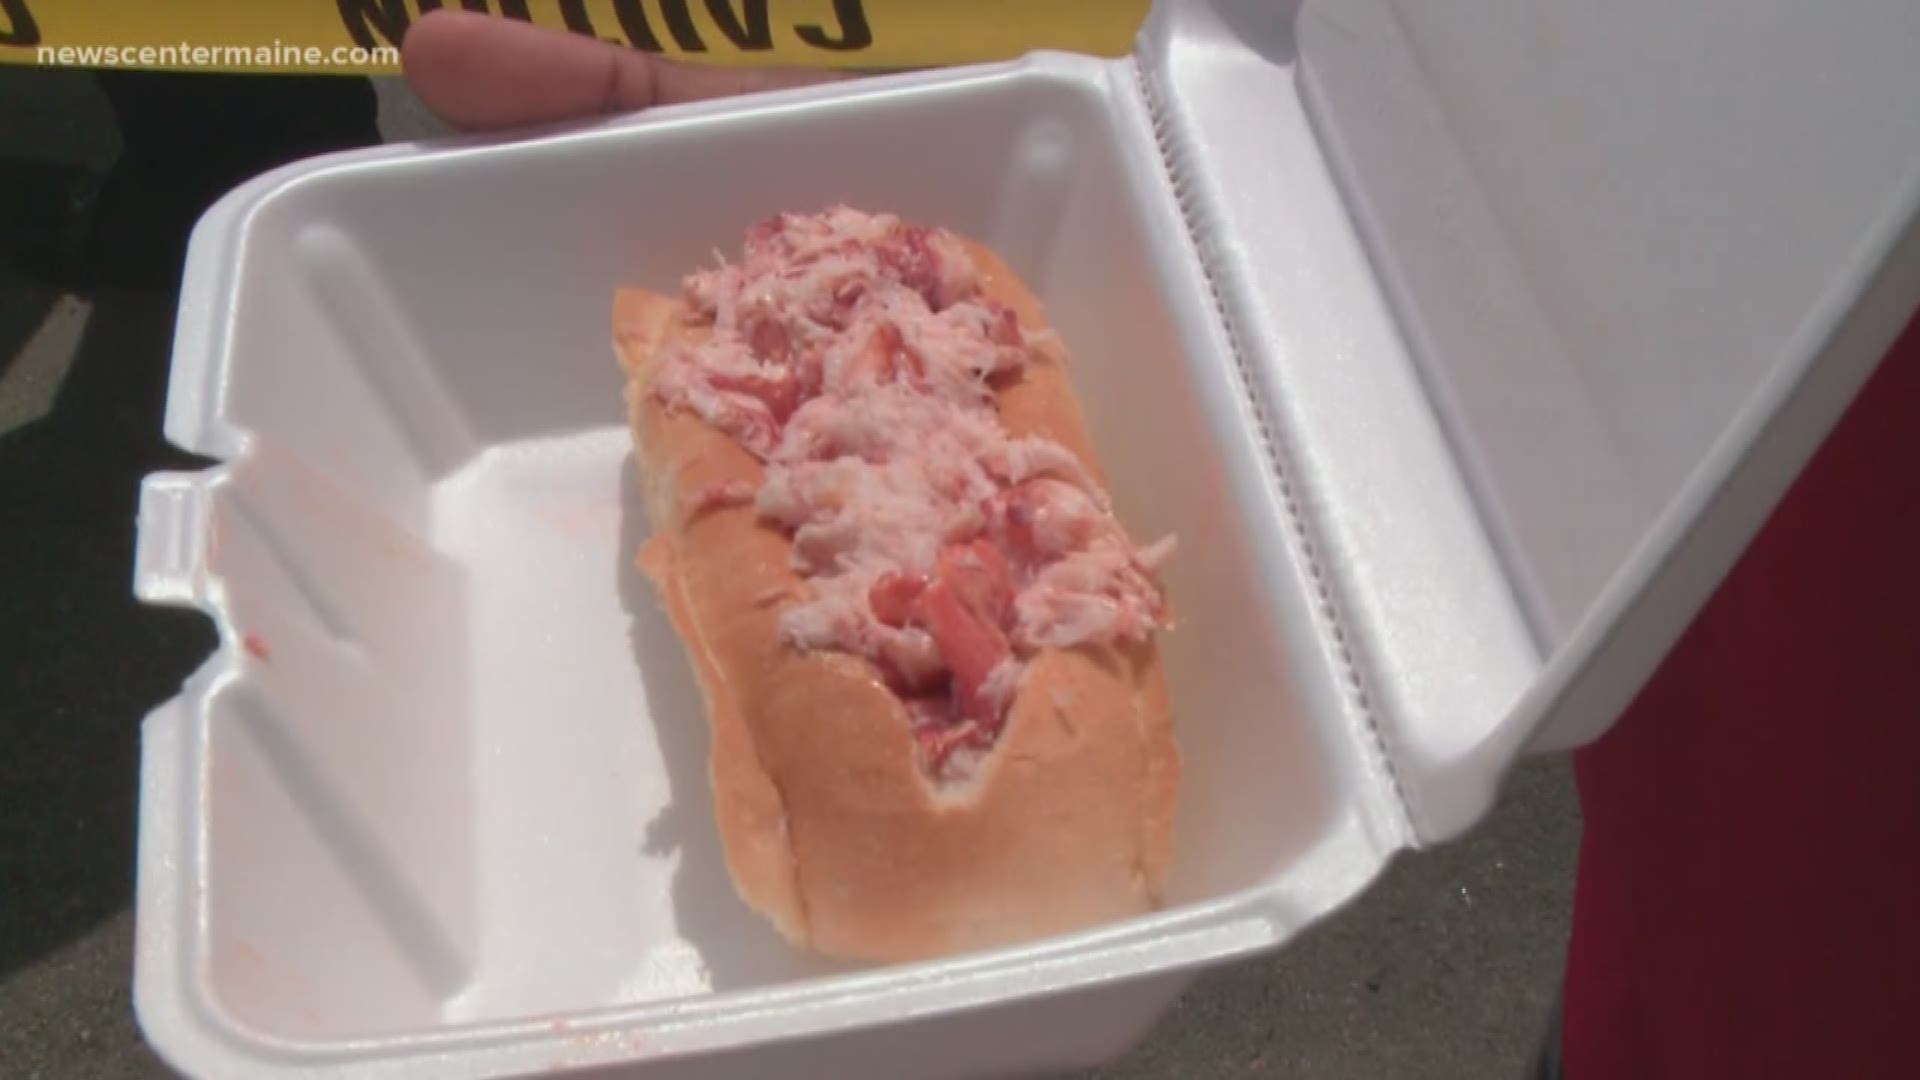 Governor's restaurants celebrated 60 years Tuesday with a sale on lobster rolls.